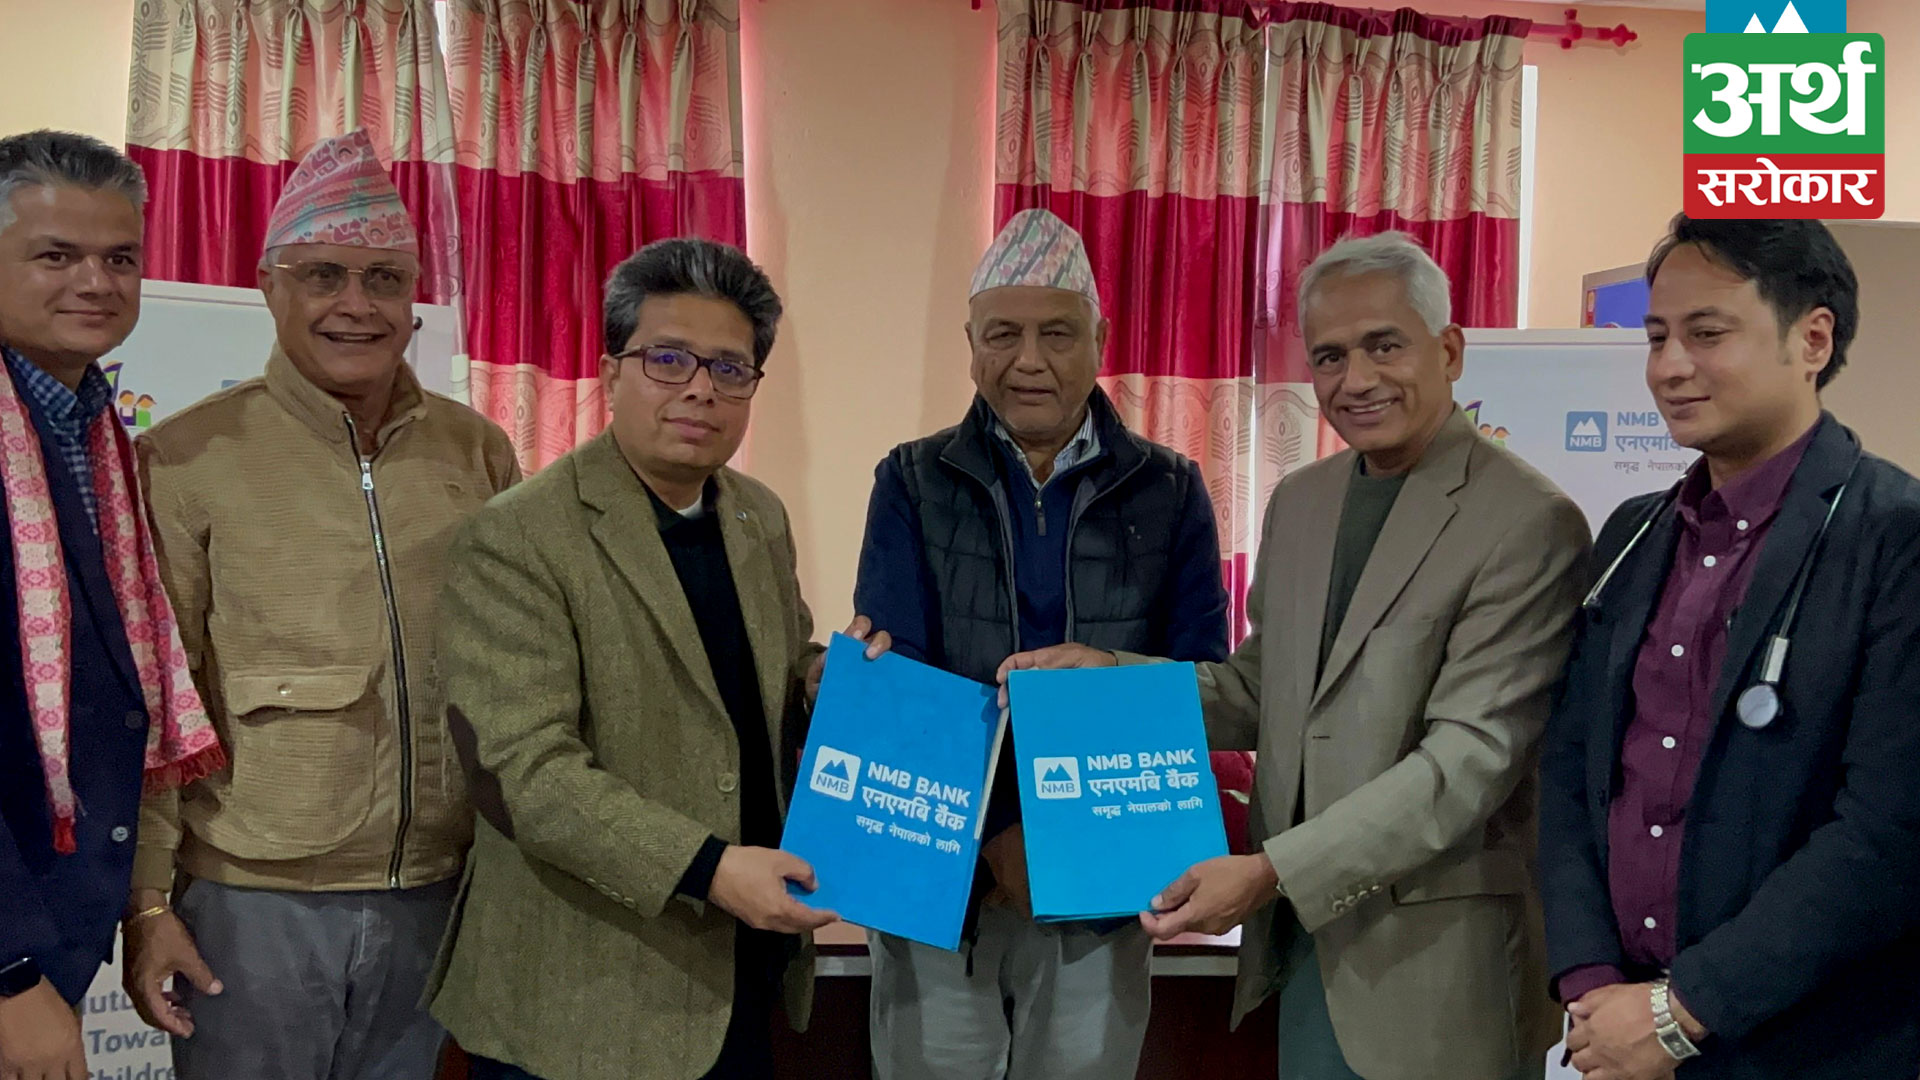 NMB Bank donates NPR 2.5 million to the Kathmandu Institute of Child Health for the construction of a new hospital ward